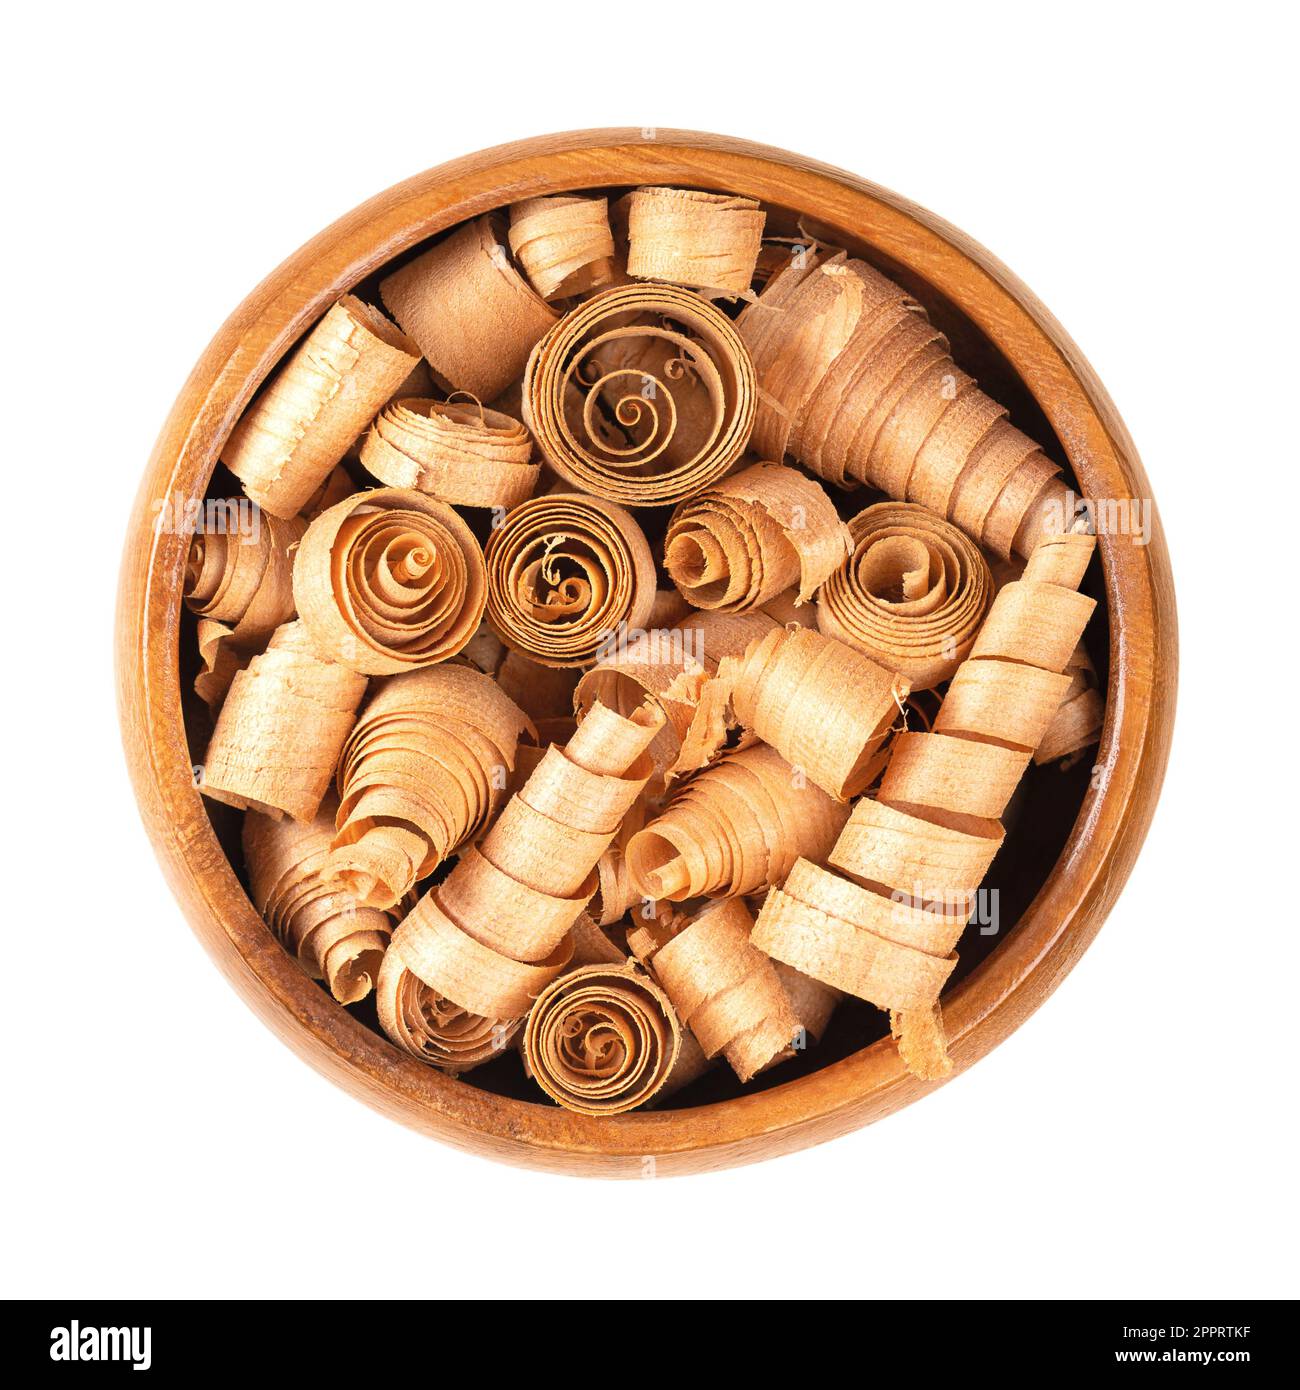 Spiral shaped wood shavings of Swiss pine, in wooden bowl. Pinus cembra, European white pine, with distinctive smell from essential oil pinosylvin. Stock Photo